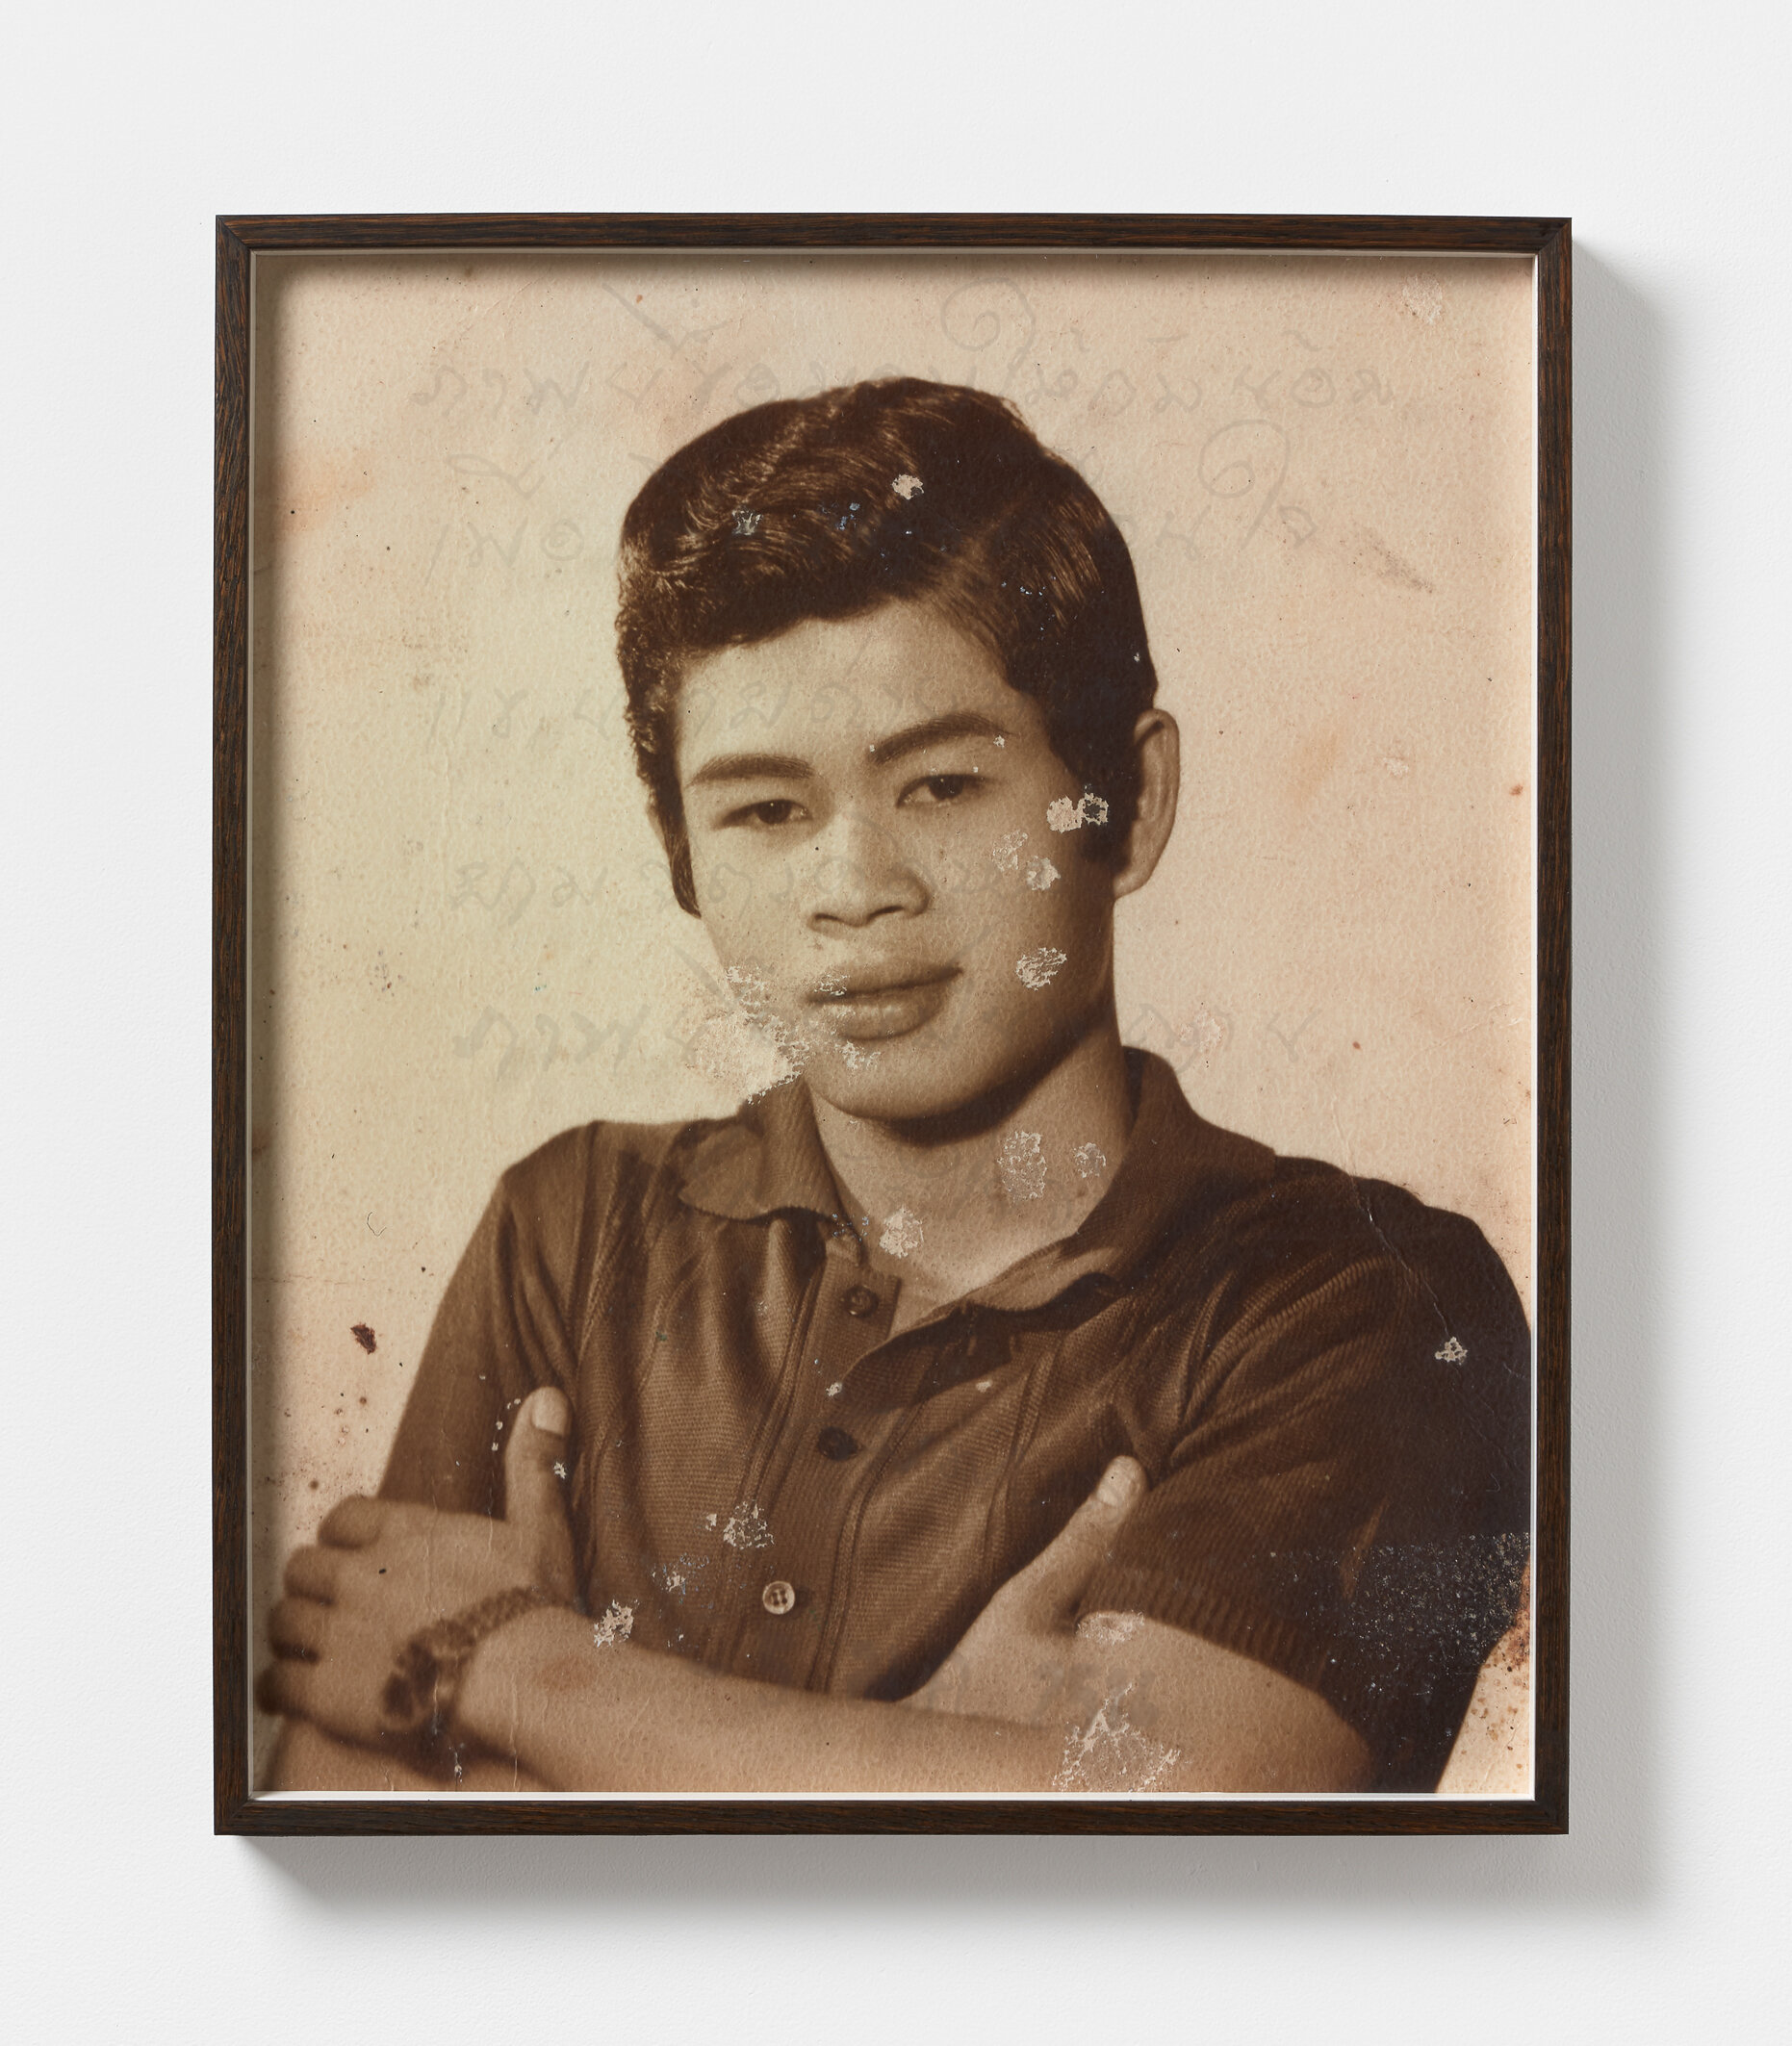   This photo I wish to give to you Noi/ to remind your eyes and your heart/ the symbol of me and my face./ When your heart is calling/ this photo is the witness./ With love from my true heart,/ Sompong/ 5 January 1971   2019  Digital print on Canson 